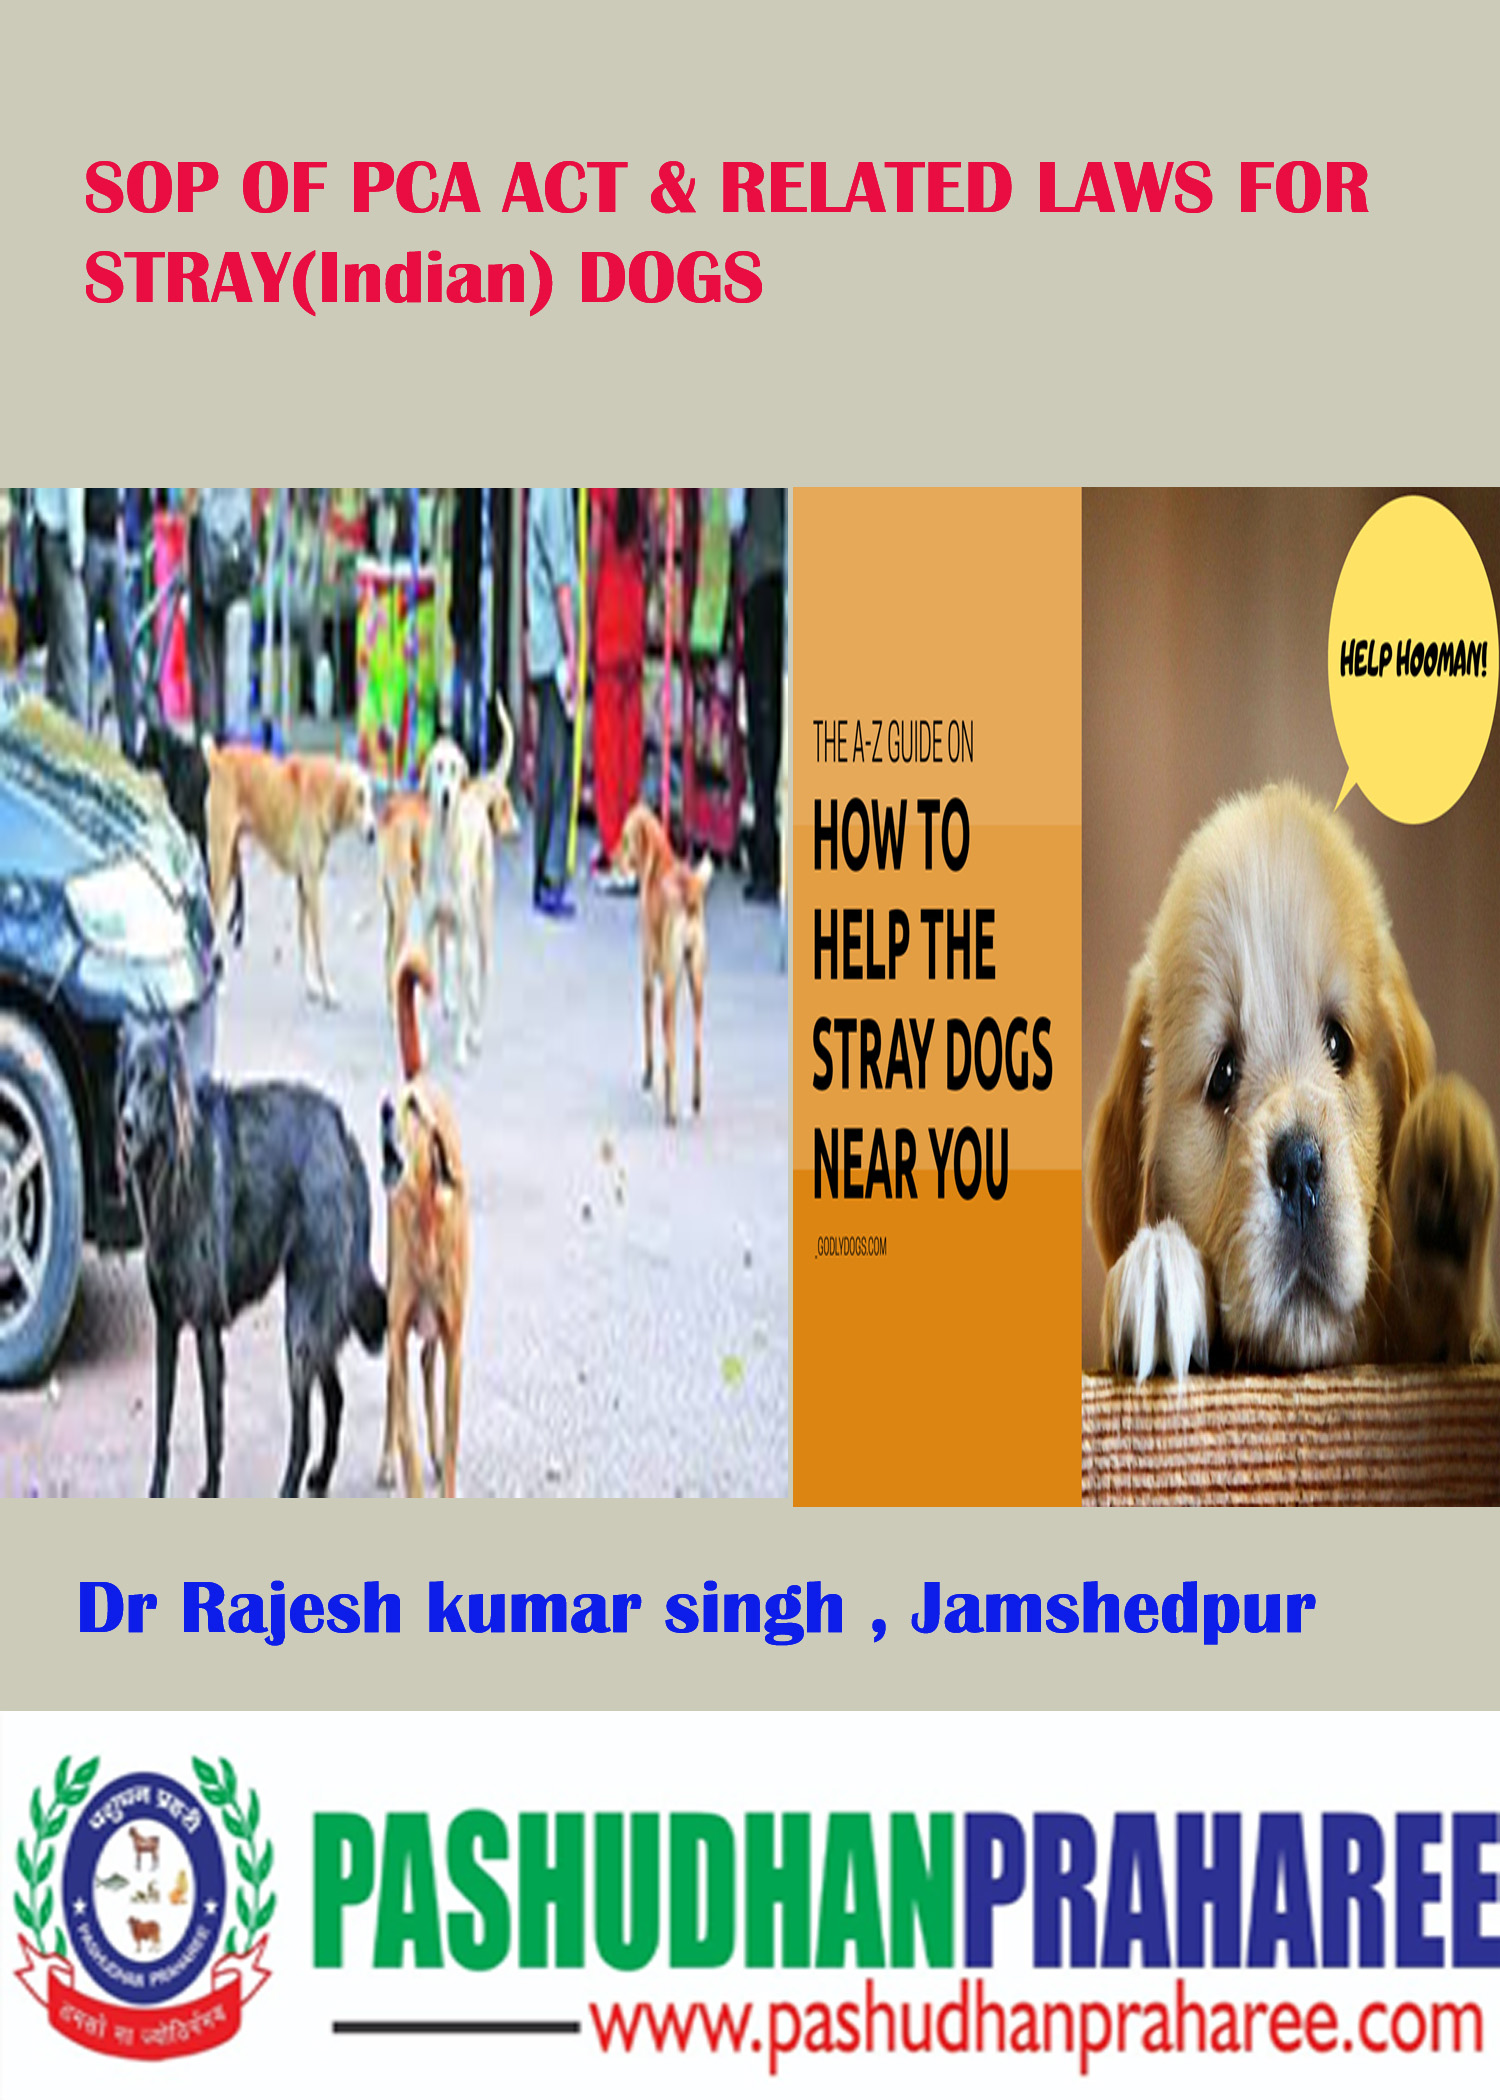 SOP OF PCA ACT & RELATED LAWS FOR STRAY(Indian) DOGS – Pashudhan praharee